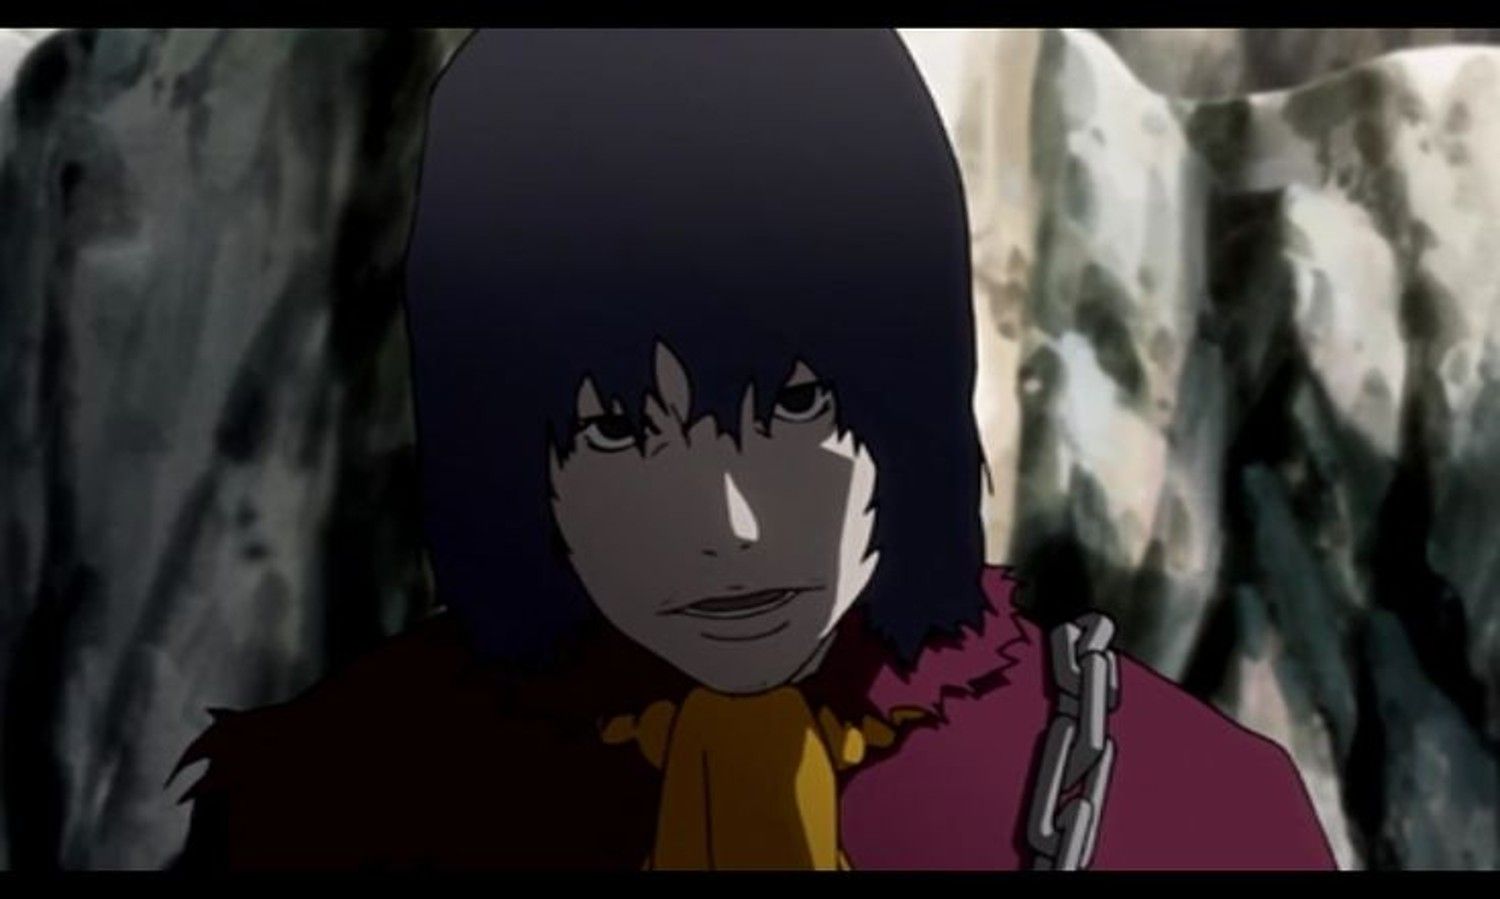 Shige sneering at the camera in Samurai Champloo.